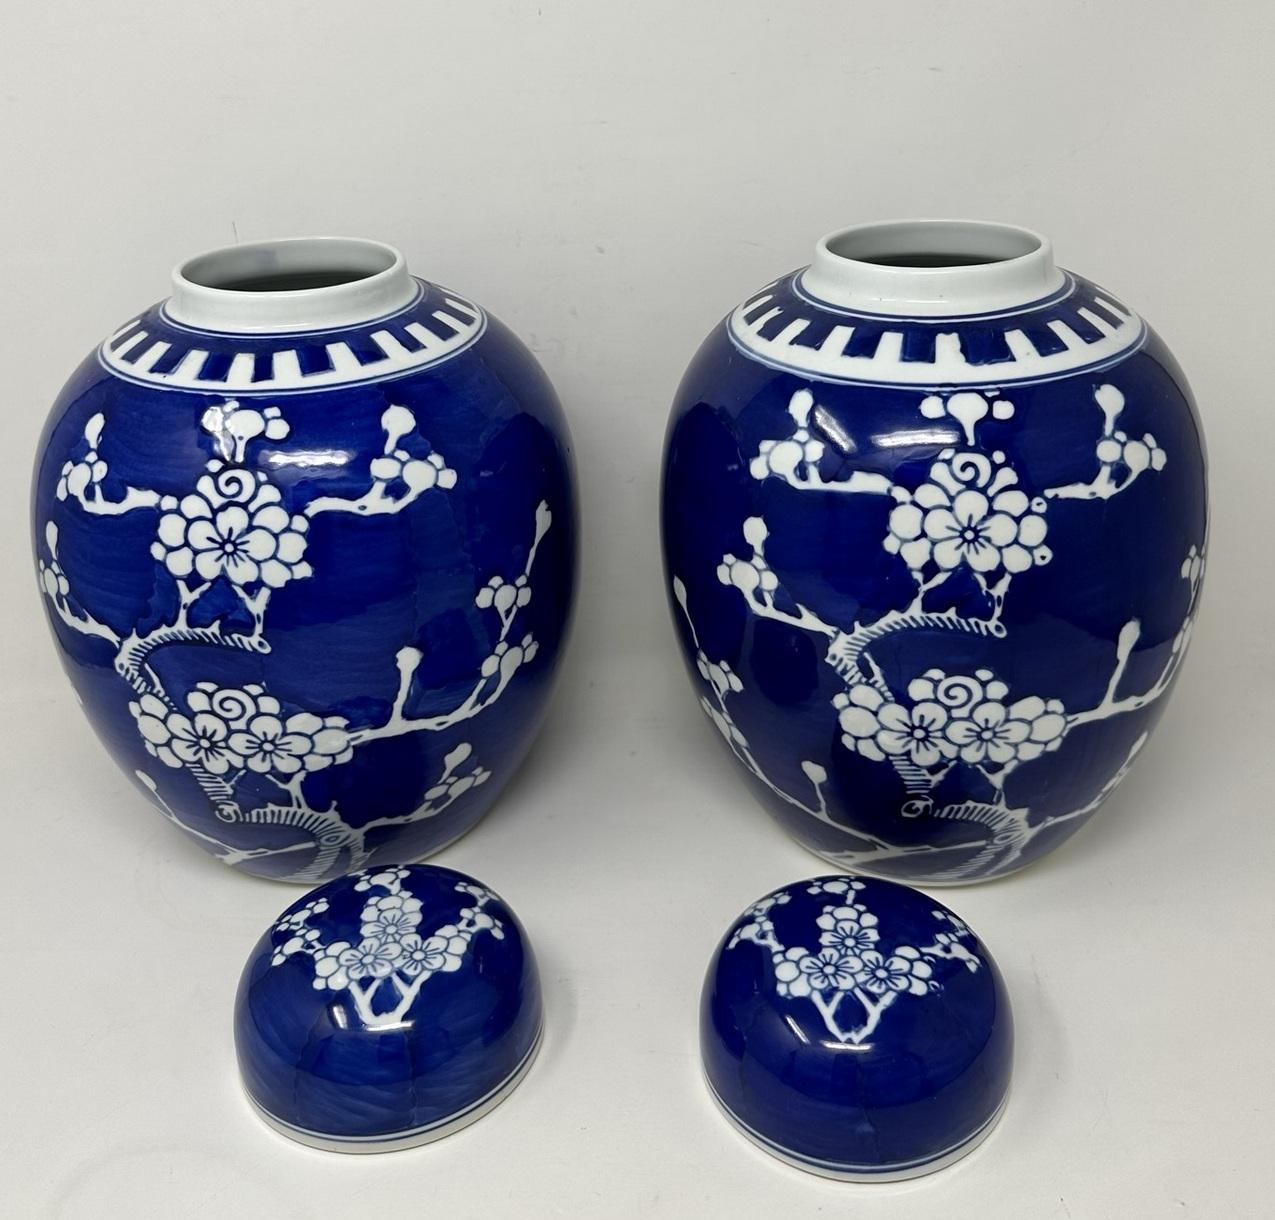 Antique Pair Asian Chinese Export Blue White Porcelain Ginger Jars Mid Century  1